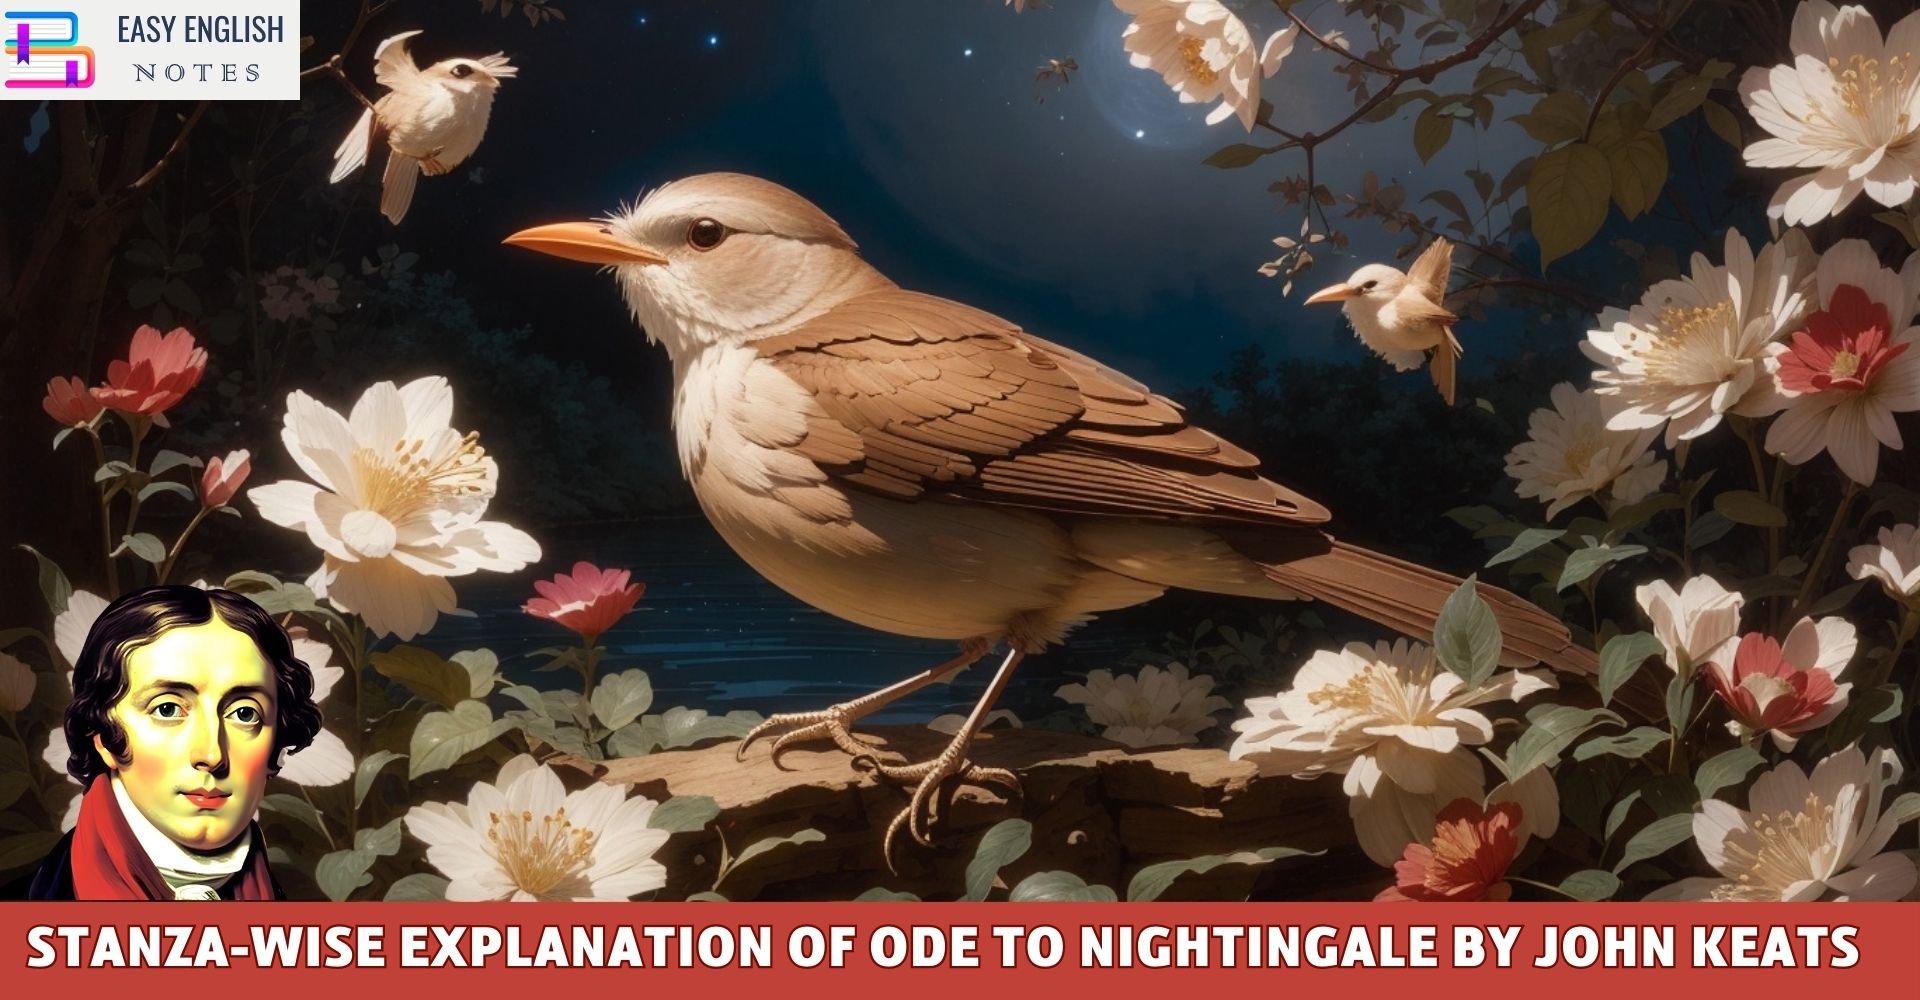 Stanza-wise Explanation Of Ode To Nightingale By John Keats